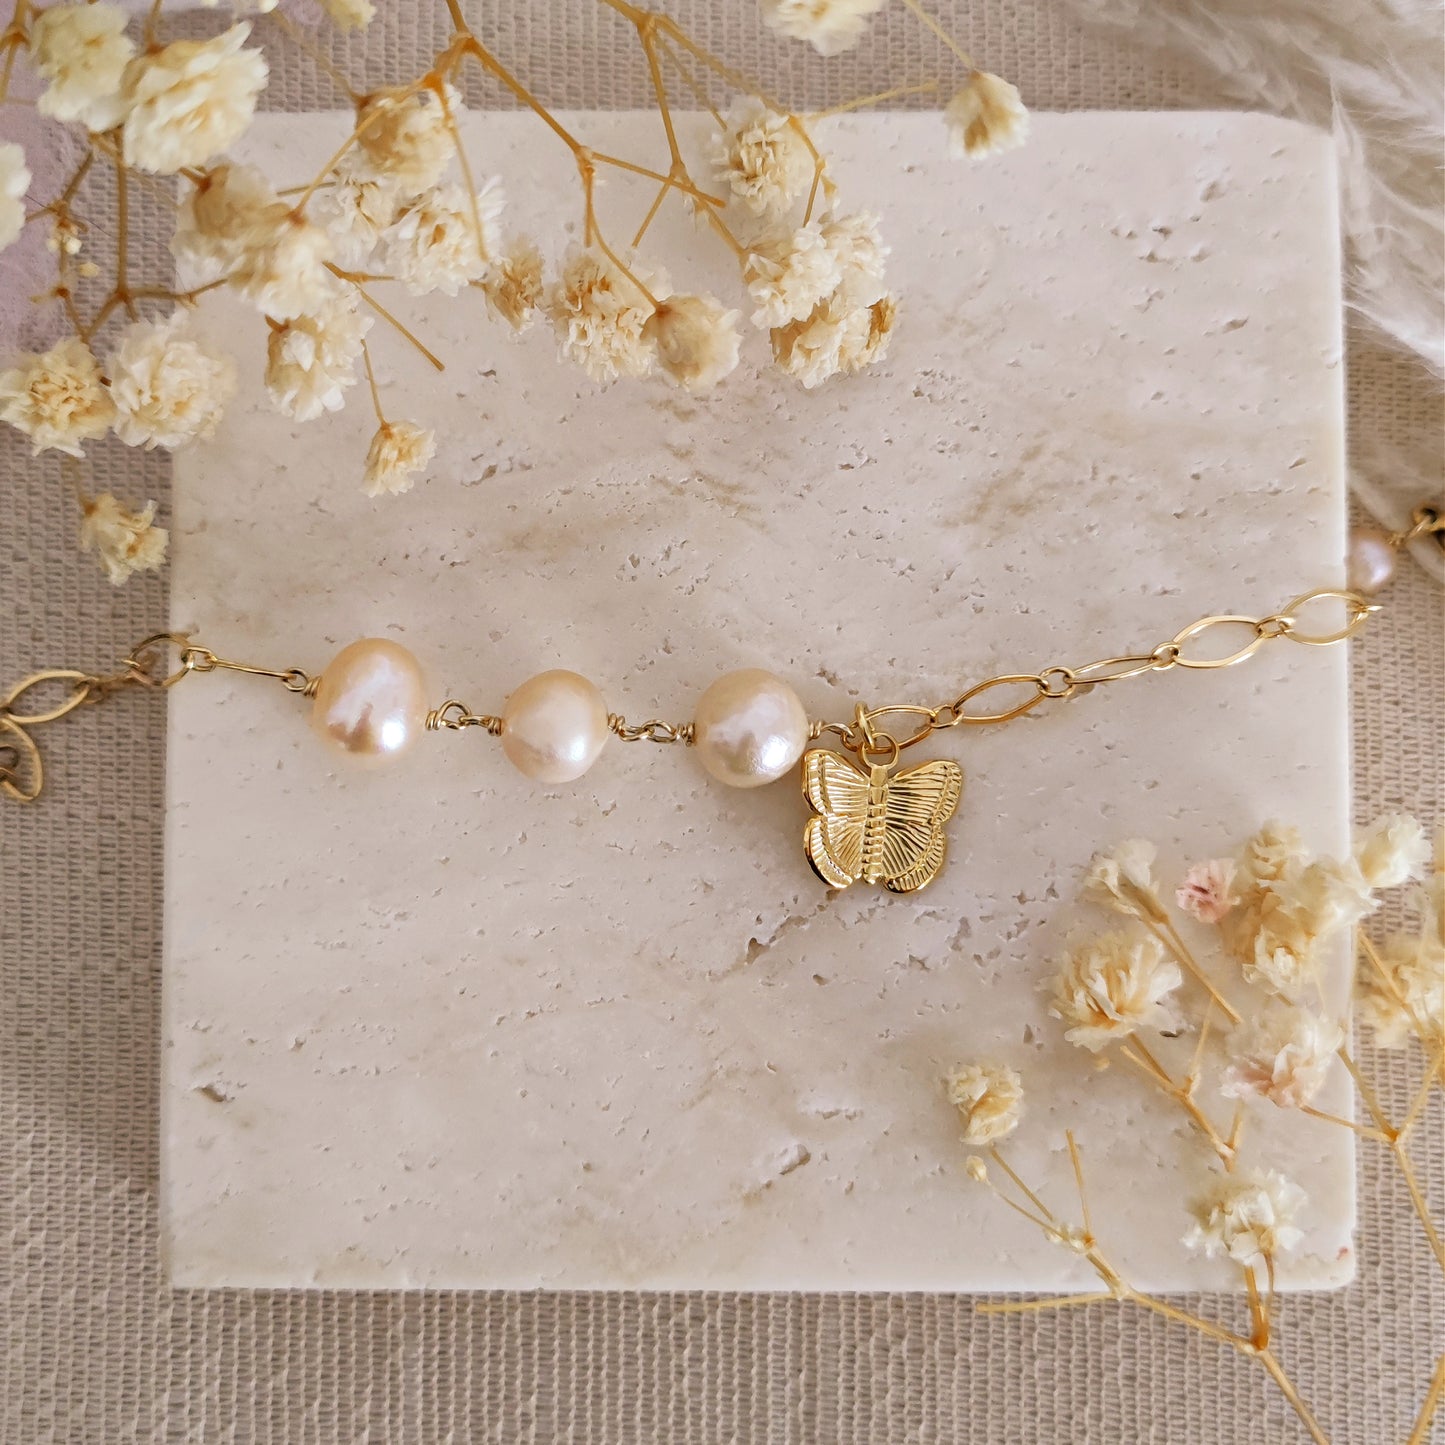 Bracelet with freshwater pearls and butterfly // YARITZA